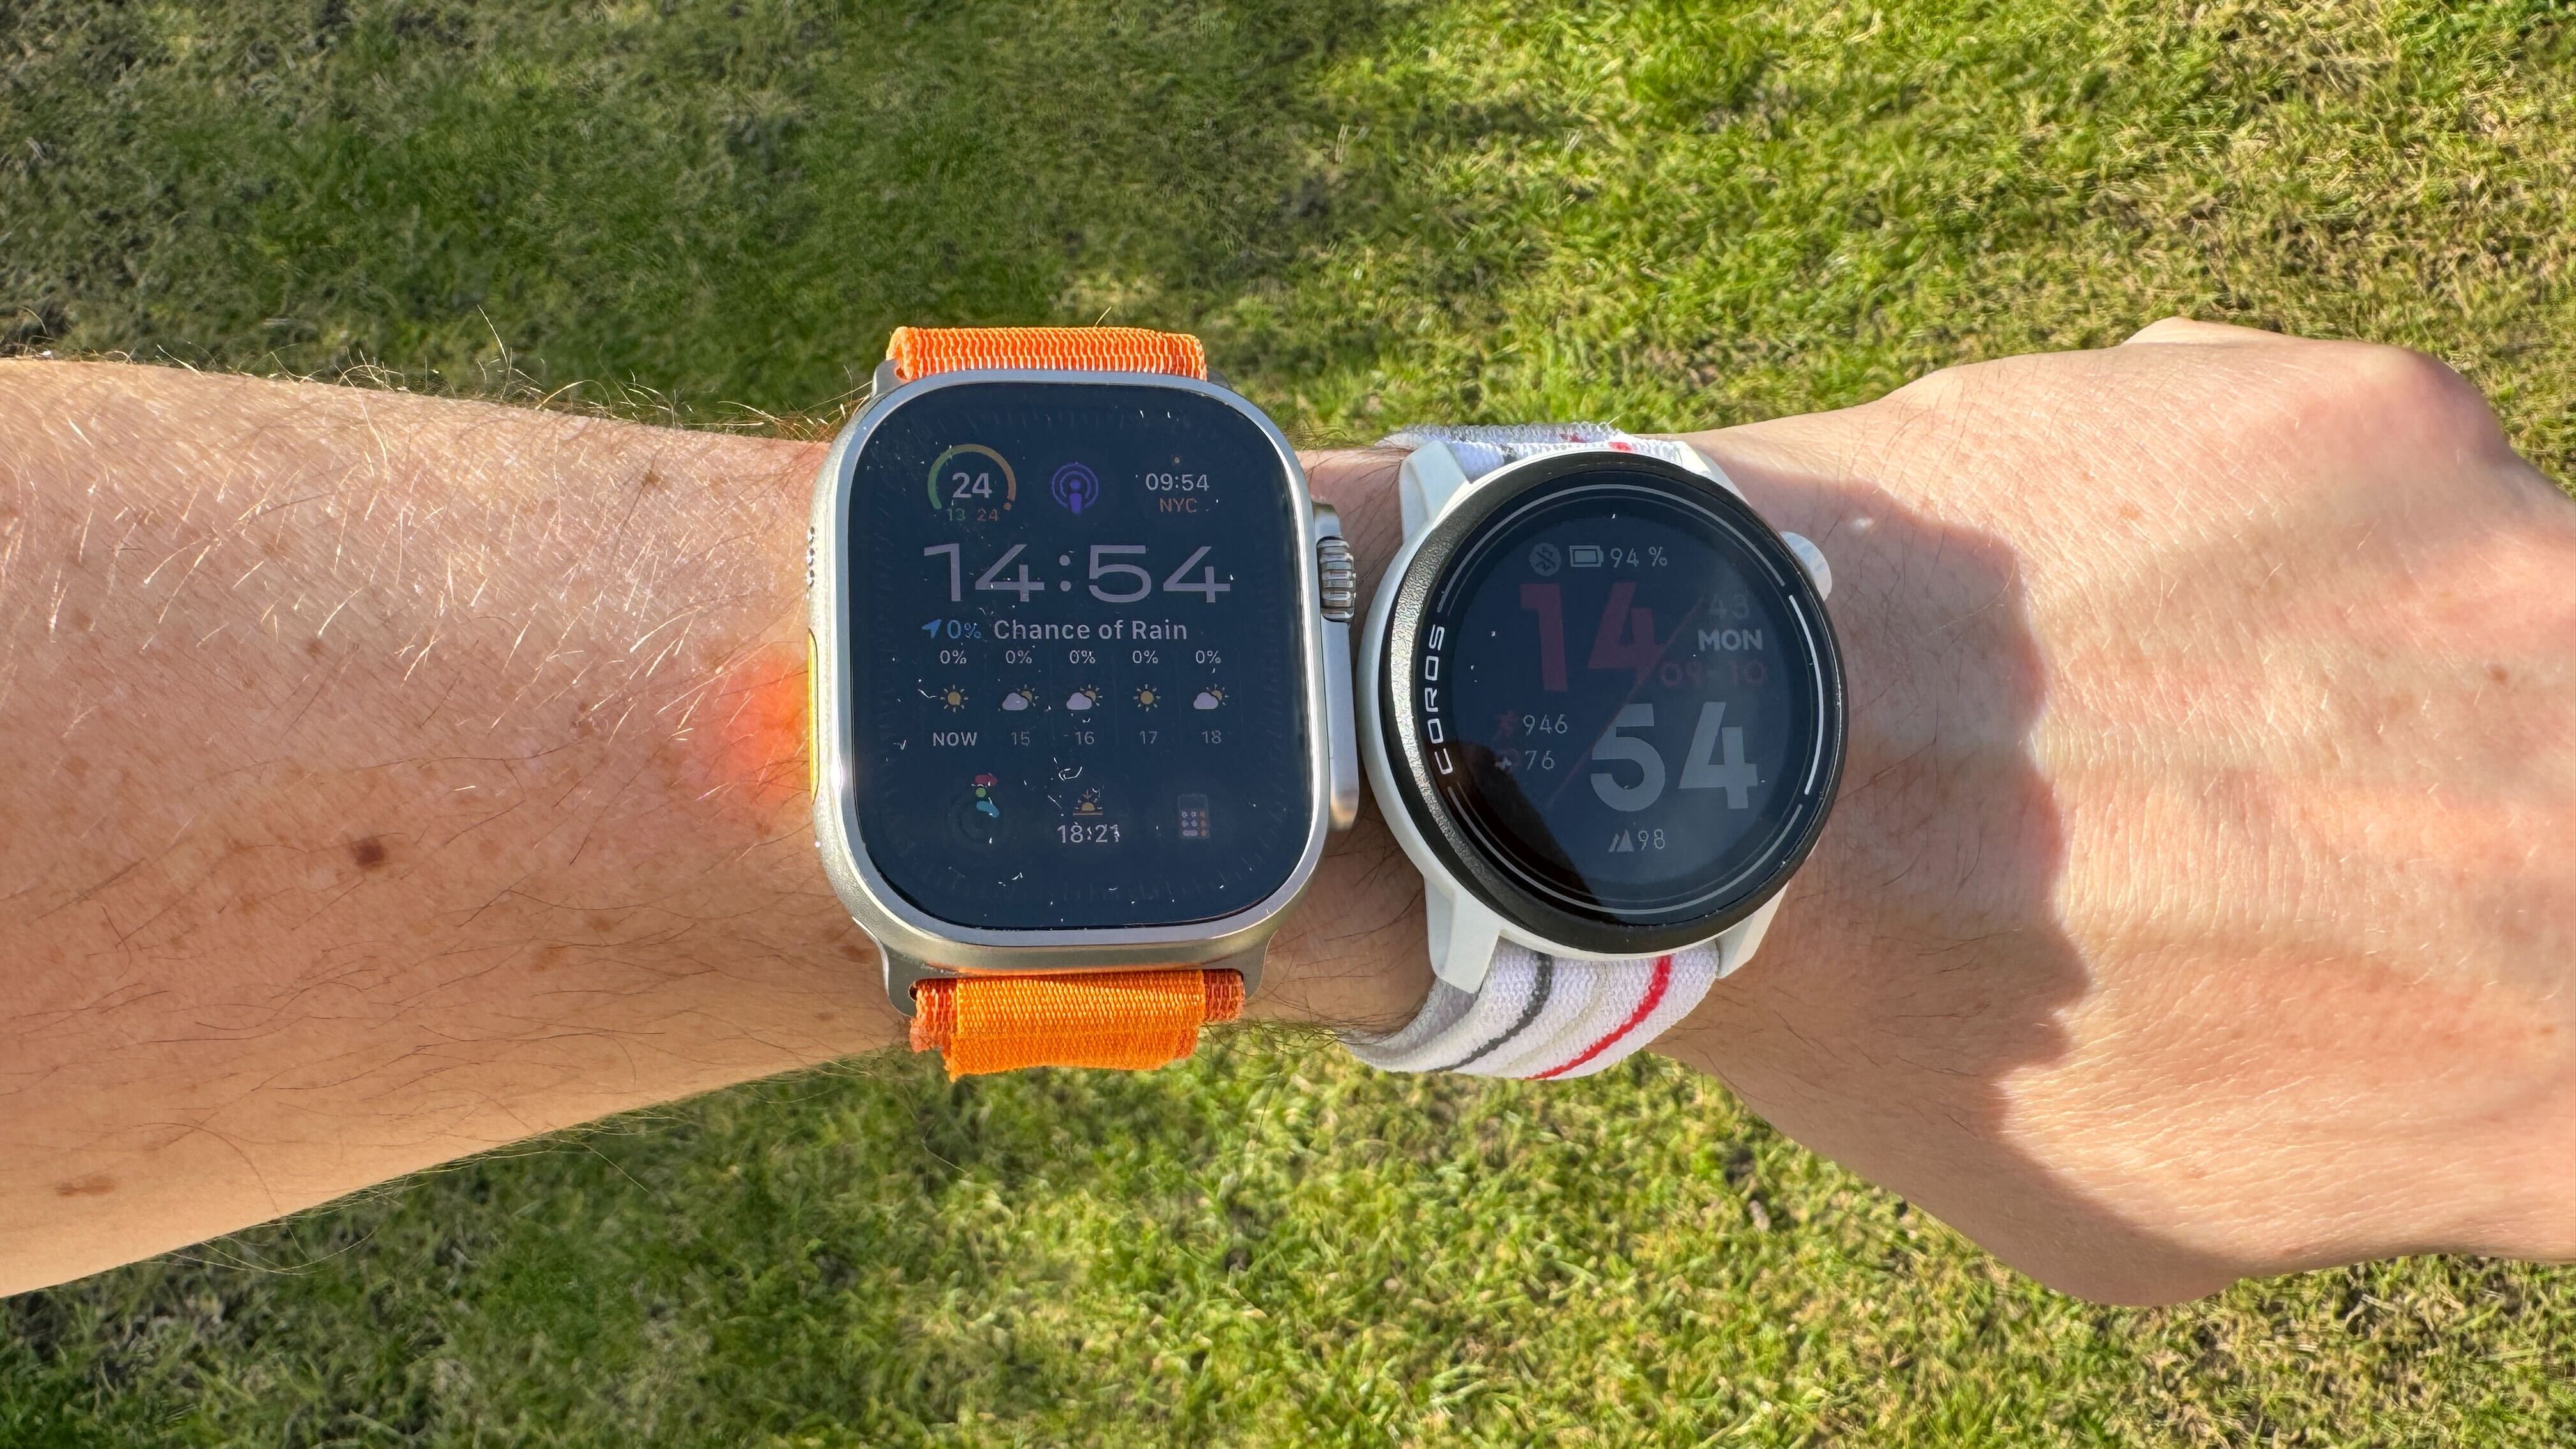 Reviewed: The New Coros Pace 3 Smartwatch – Triathlete